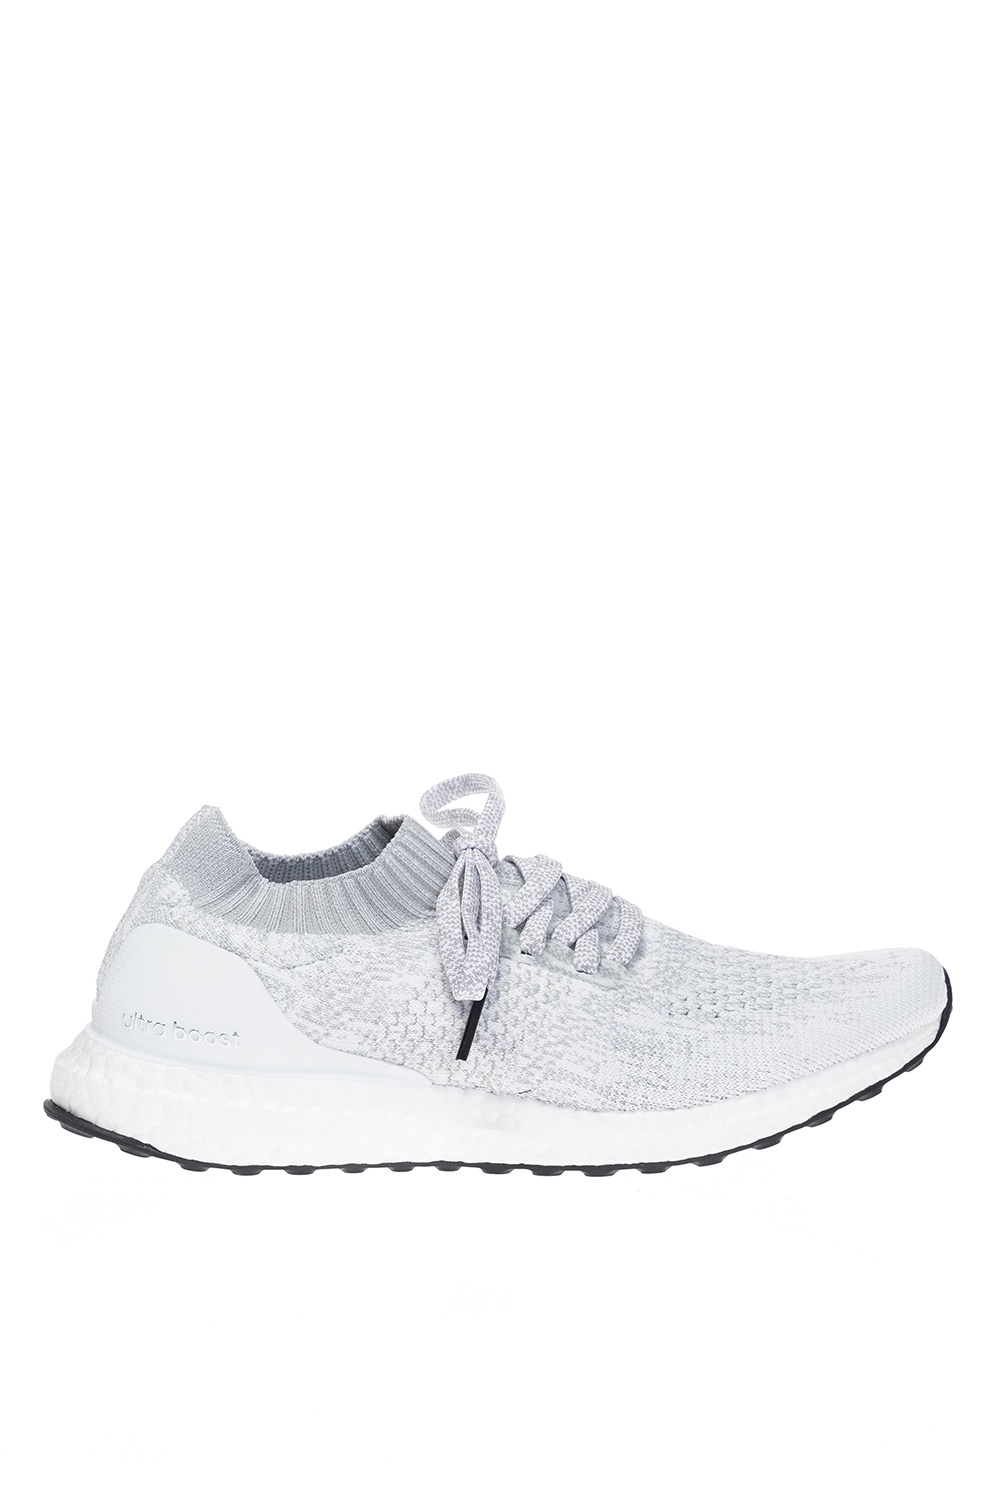 ultraboost uncaged canada